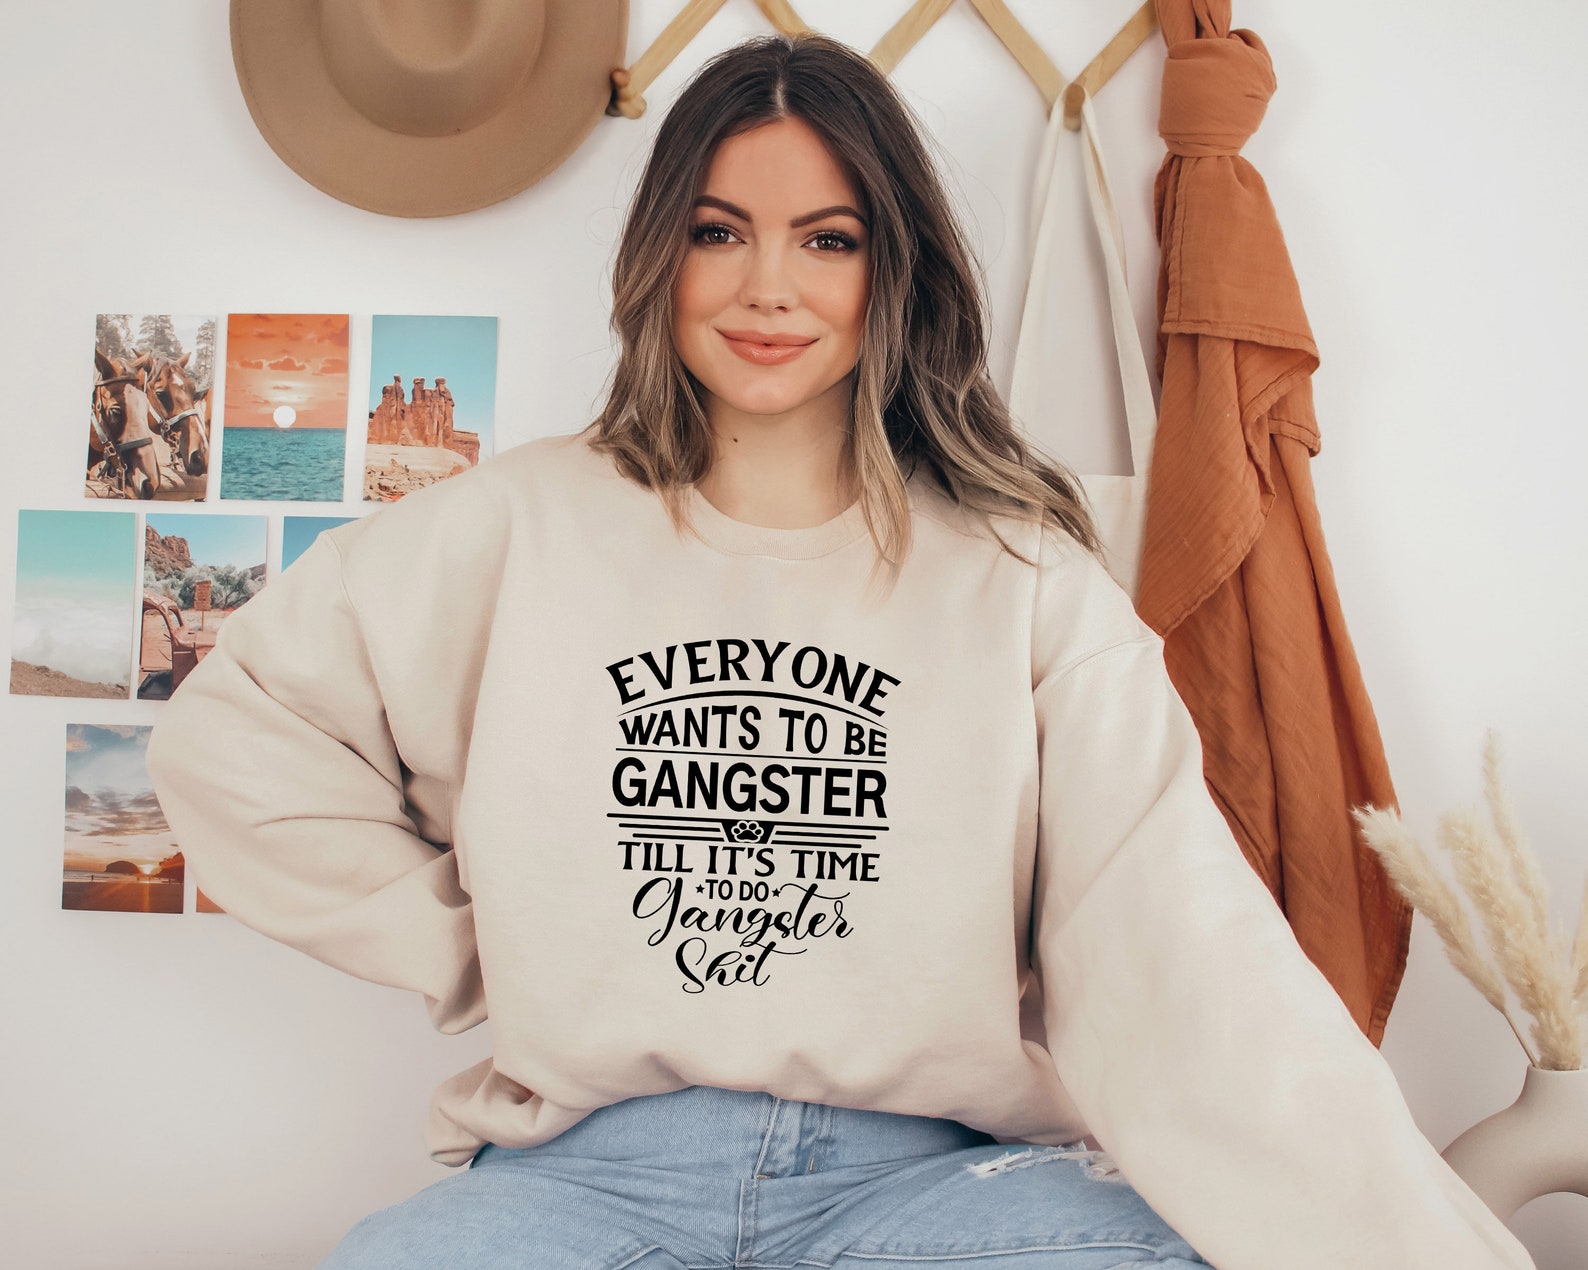 Everyone Wants to Be Gangster Until It's Time to Do - Etsy